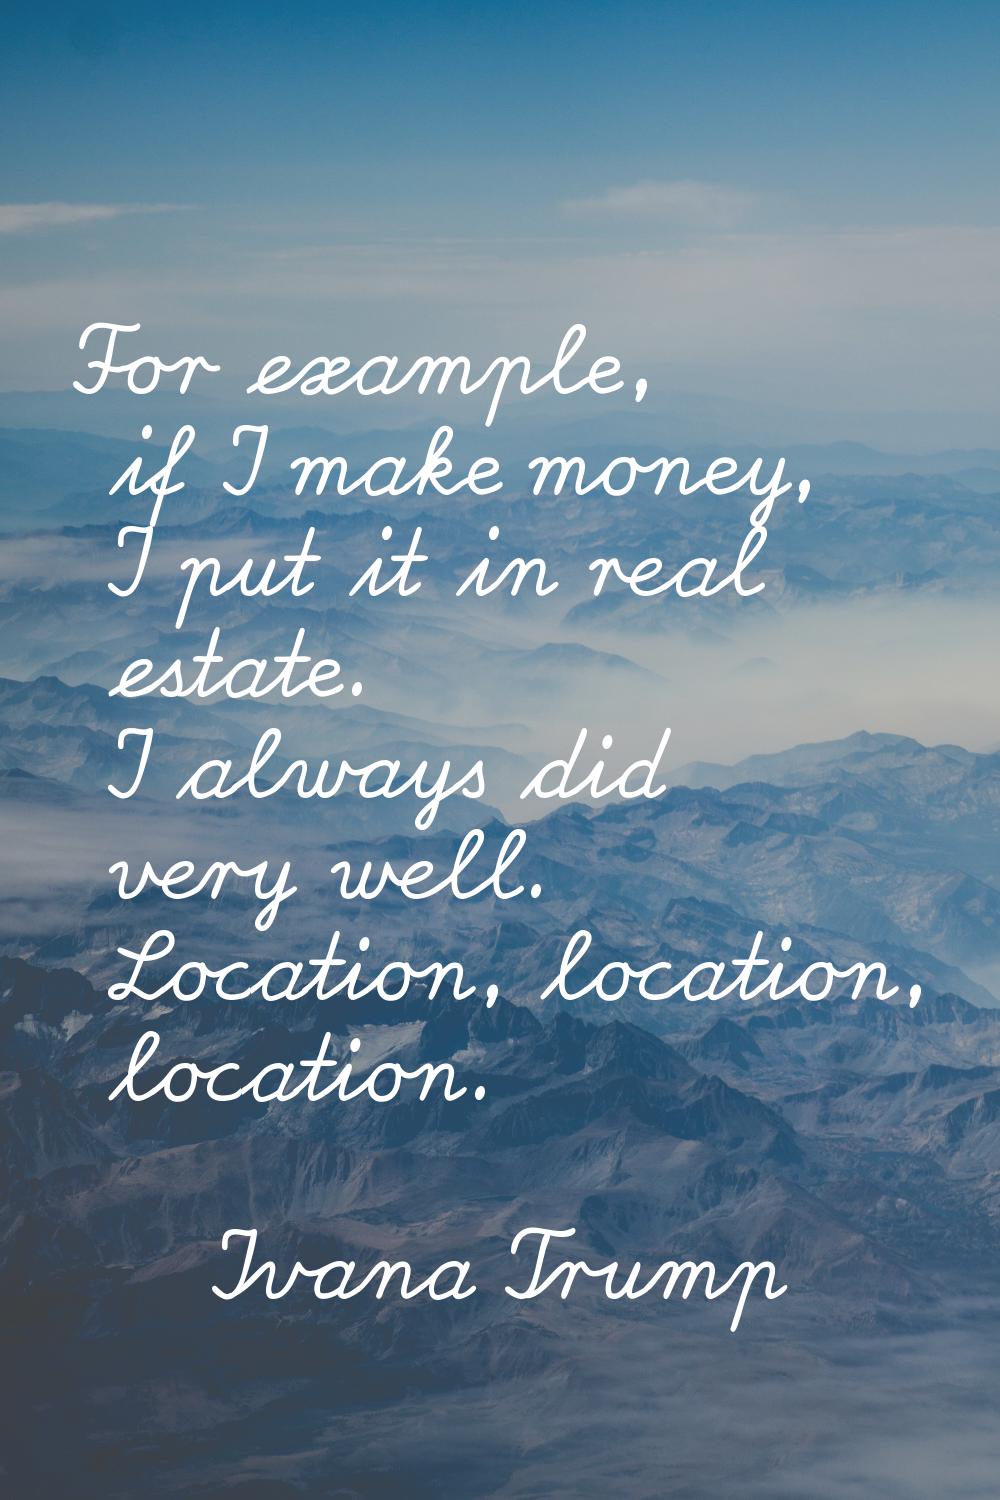 For example, if I make money, I put it in real estate. I always did very well. Location, location, 